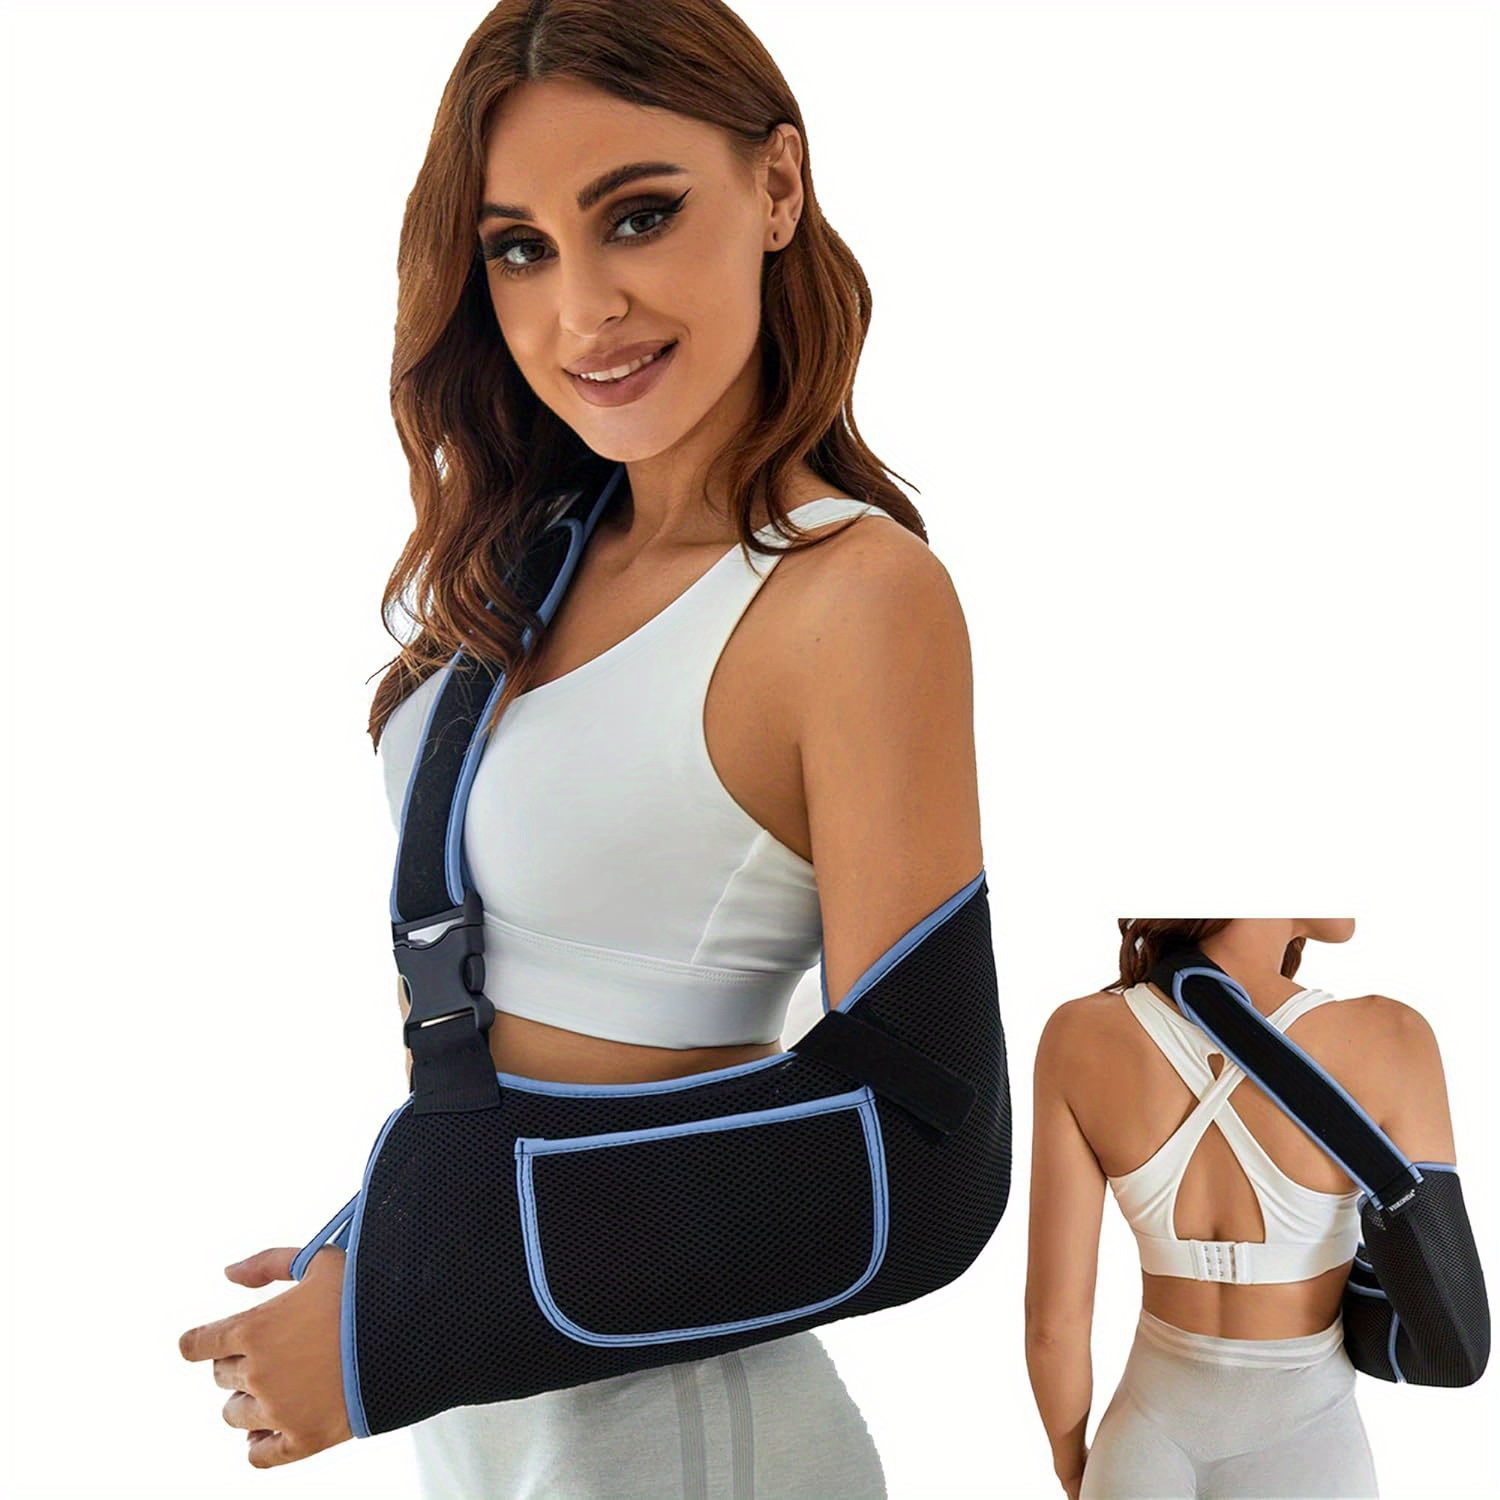 

Comfortable Shoulder Immobilizer Arm Sling - Rotator Cuff Support Brace For Men & Women, Ideal For Broken, Dislocated, Fractured, Or Strained Shoulders, Dry Clean Only (medium)